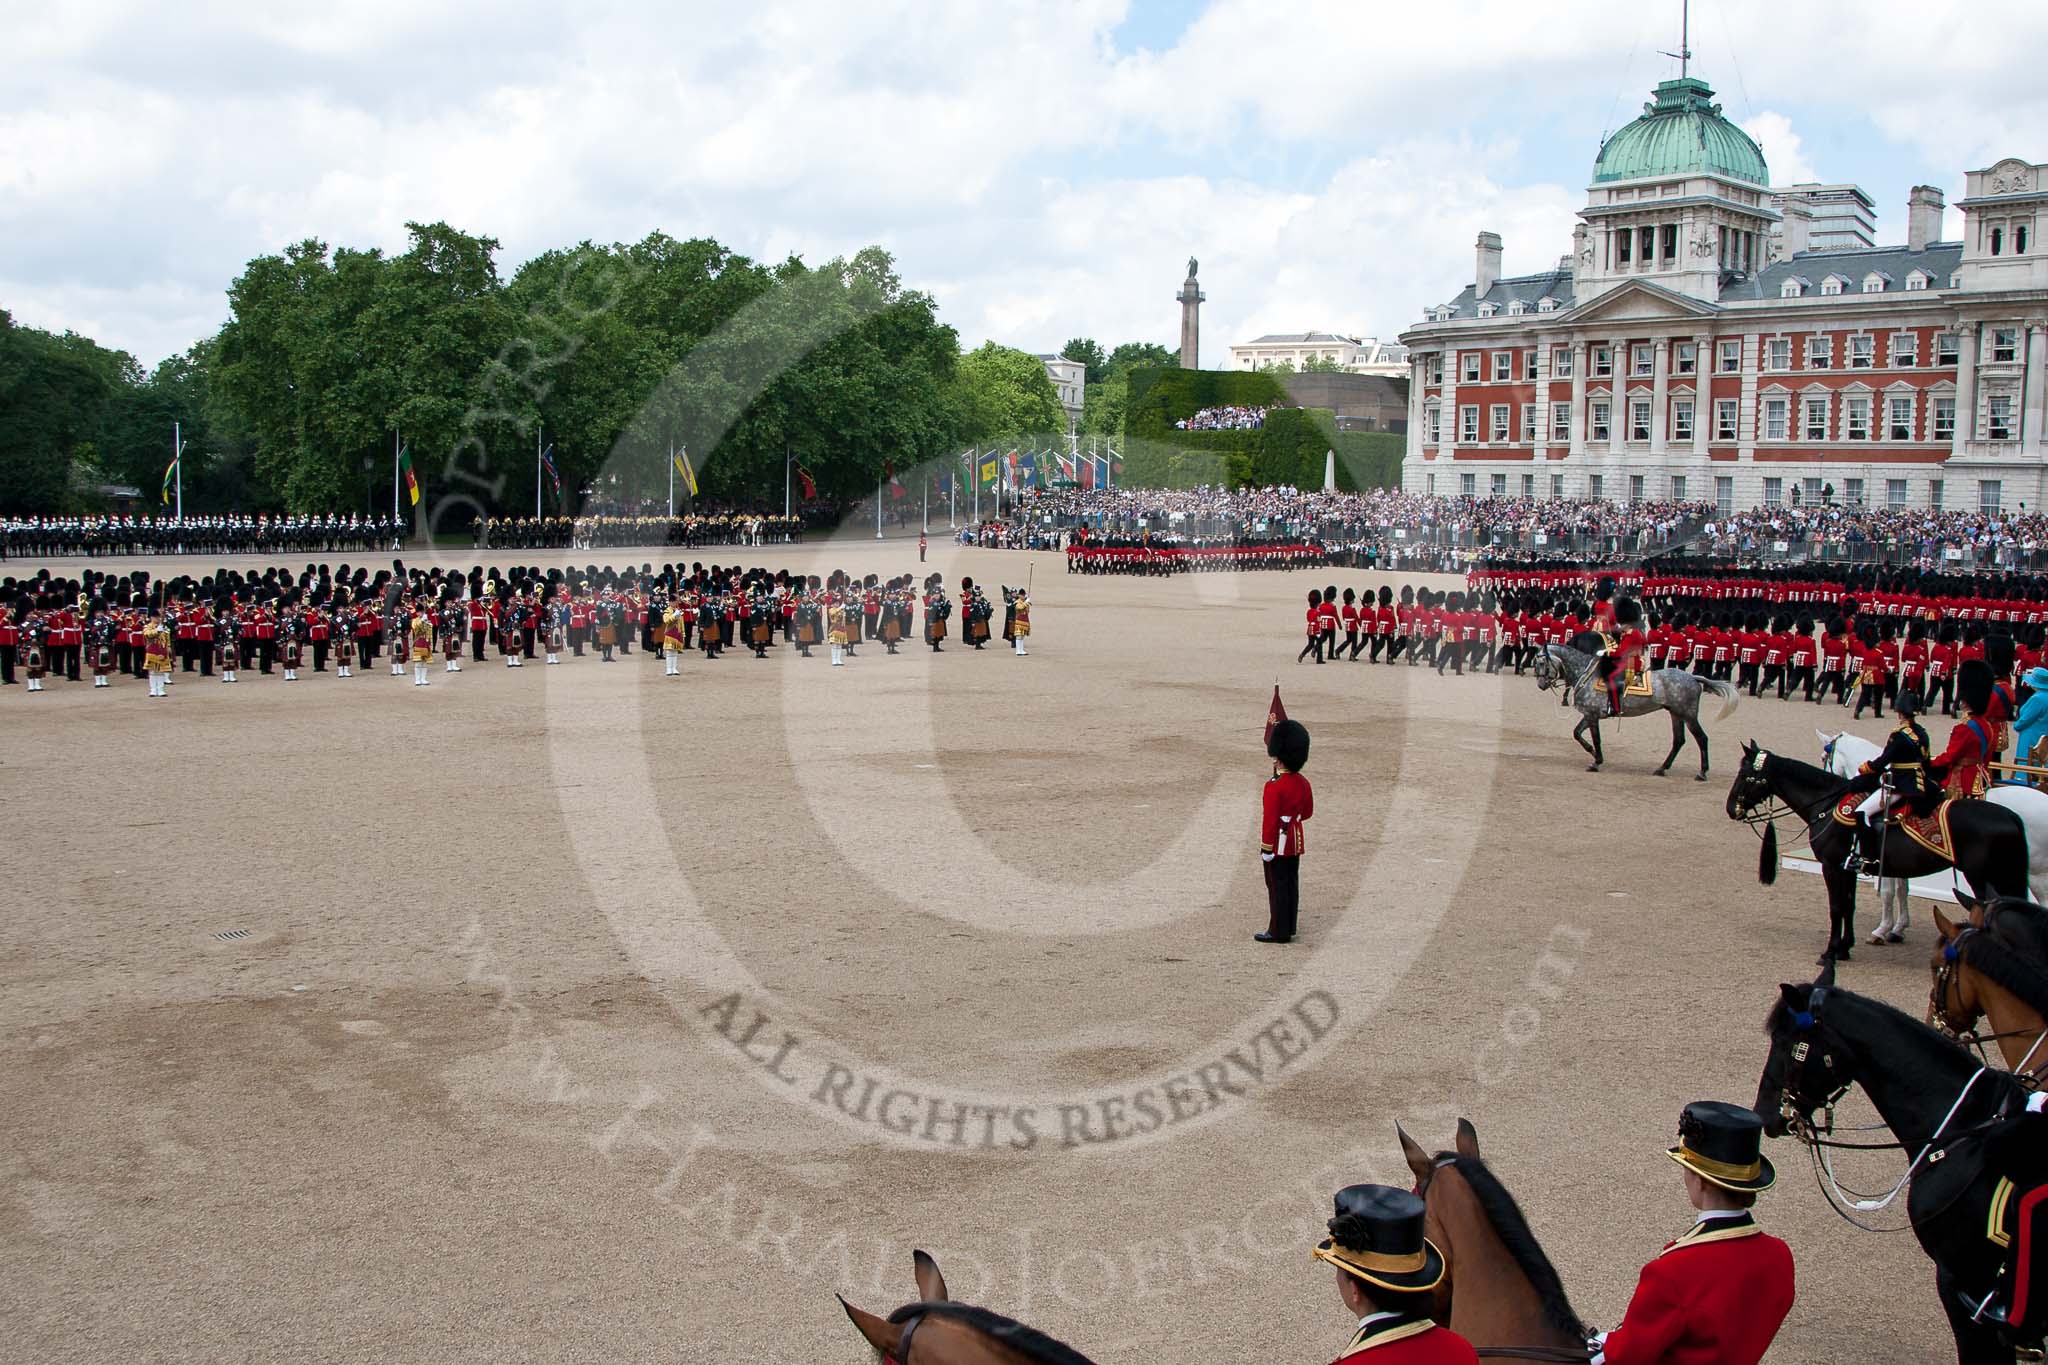 Trooping the Colour 2009: The March Past is about to end - the foot guards divisions are marching on the right hand side, on the left, in the centre of Horse Guards Parade, the Massed Bands, behind them on the left the Life Guards and Blues and Royals, on the right the Mounted Bands..
Horse Guards Parade, Westminster,
London SW1,

United Kingdom,
on 13 June 2009 at 11:50, image #224